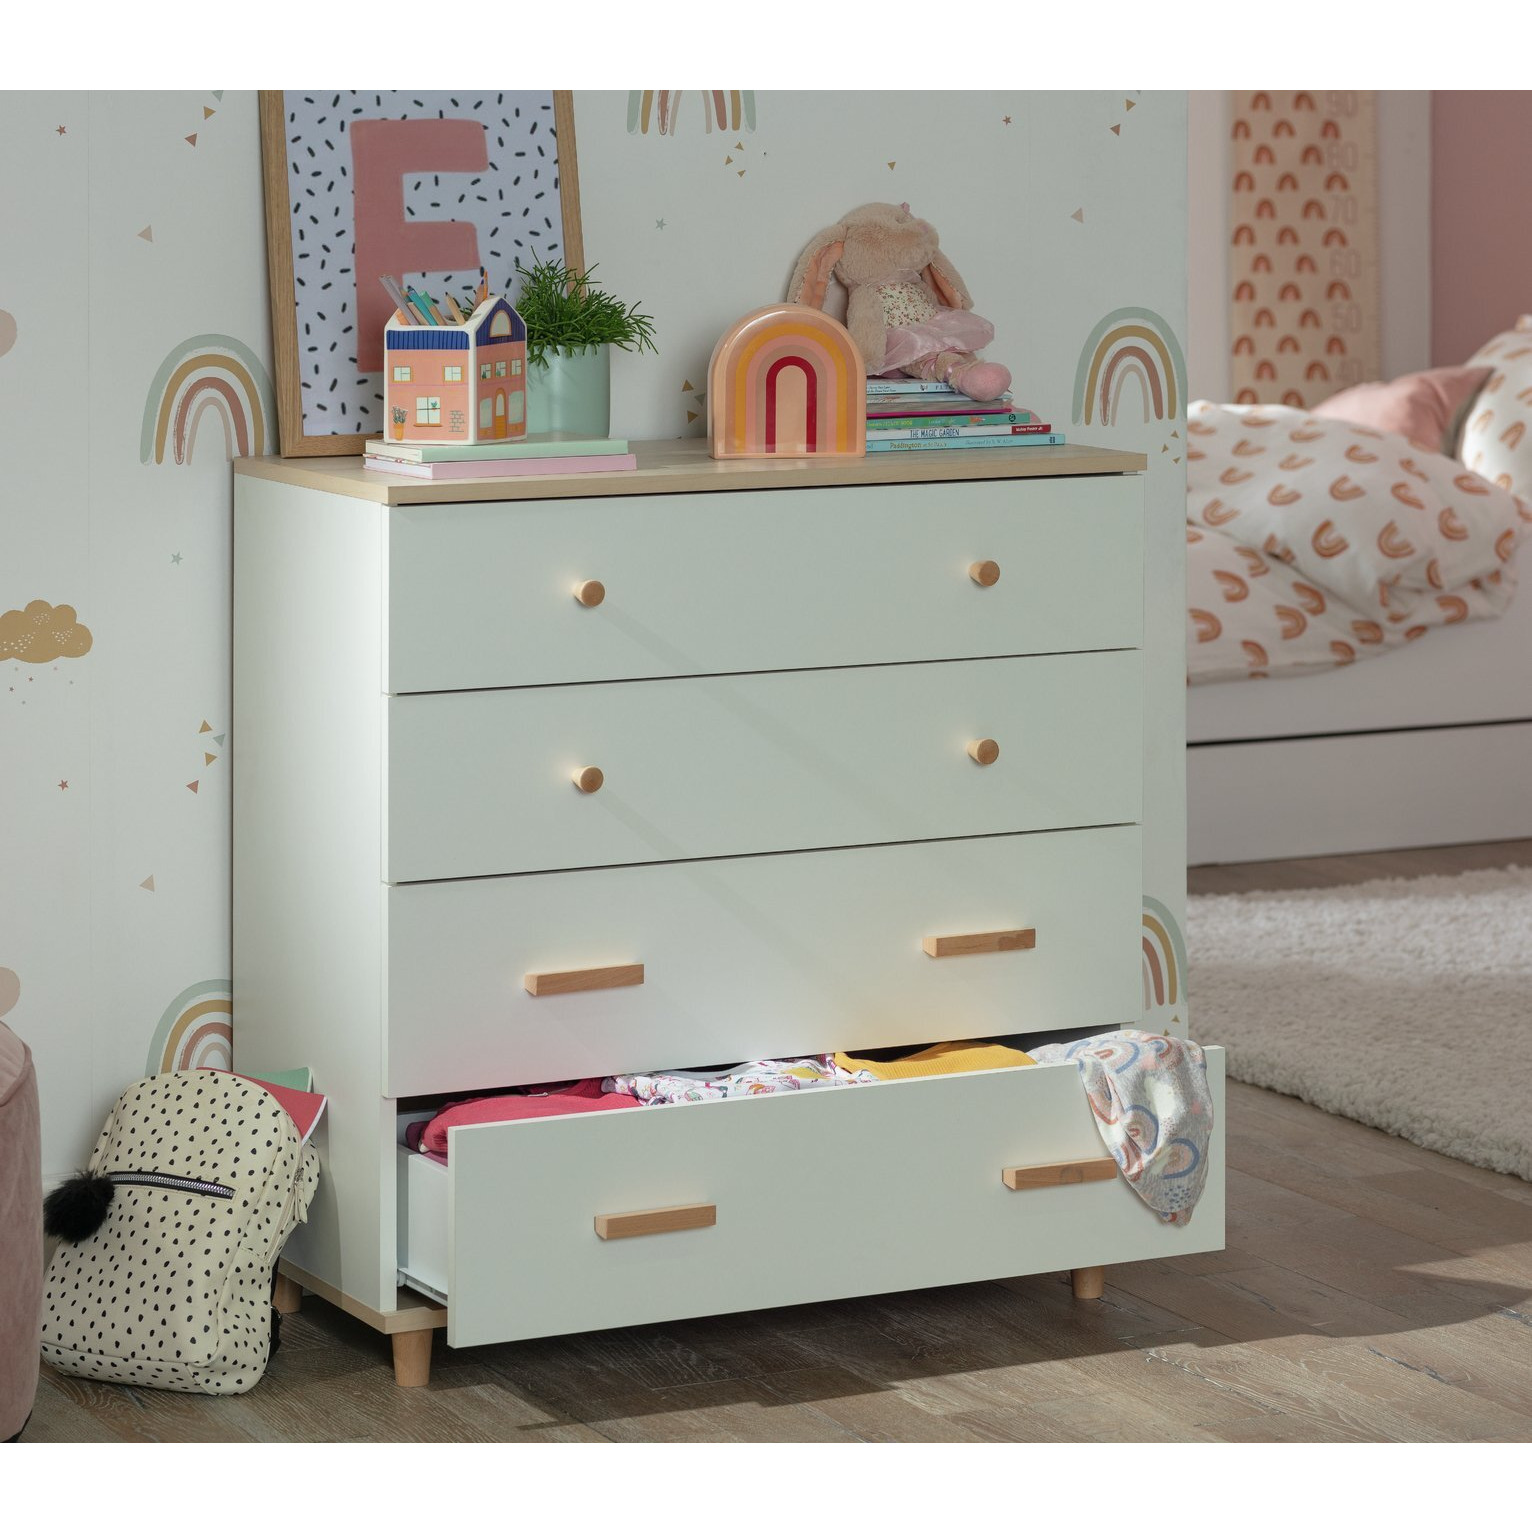 Habitat Melby 4 Chest of Drawers - White and Acacia - image 1